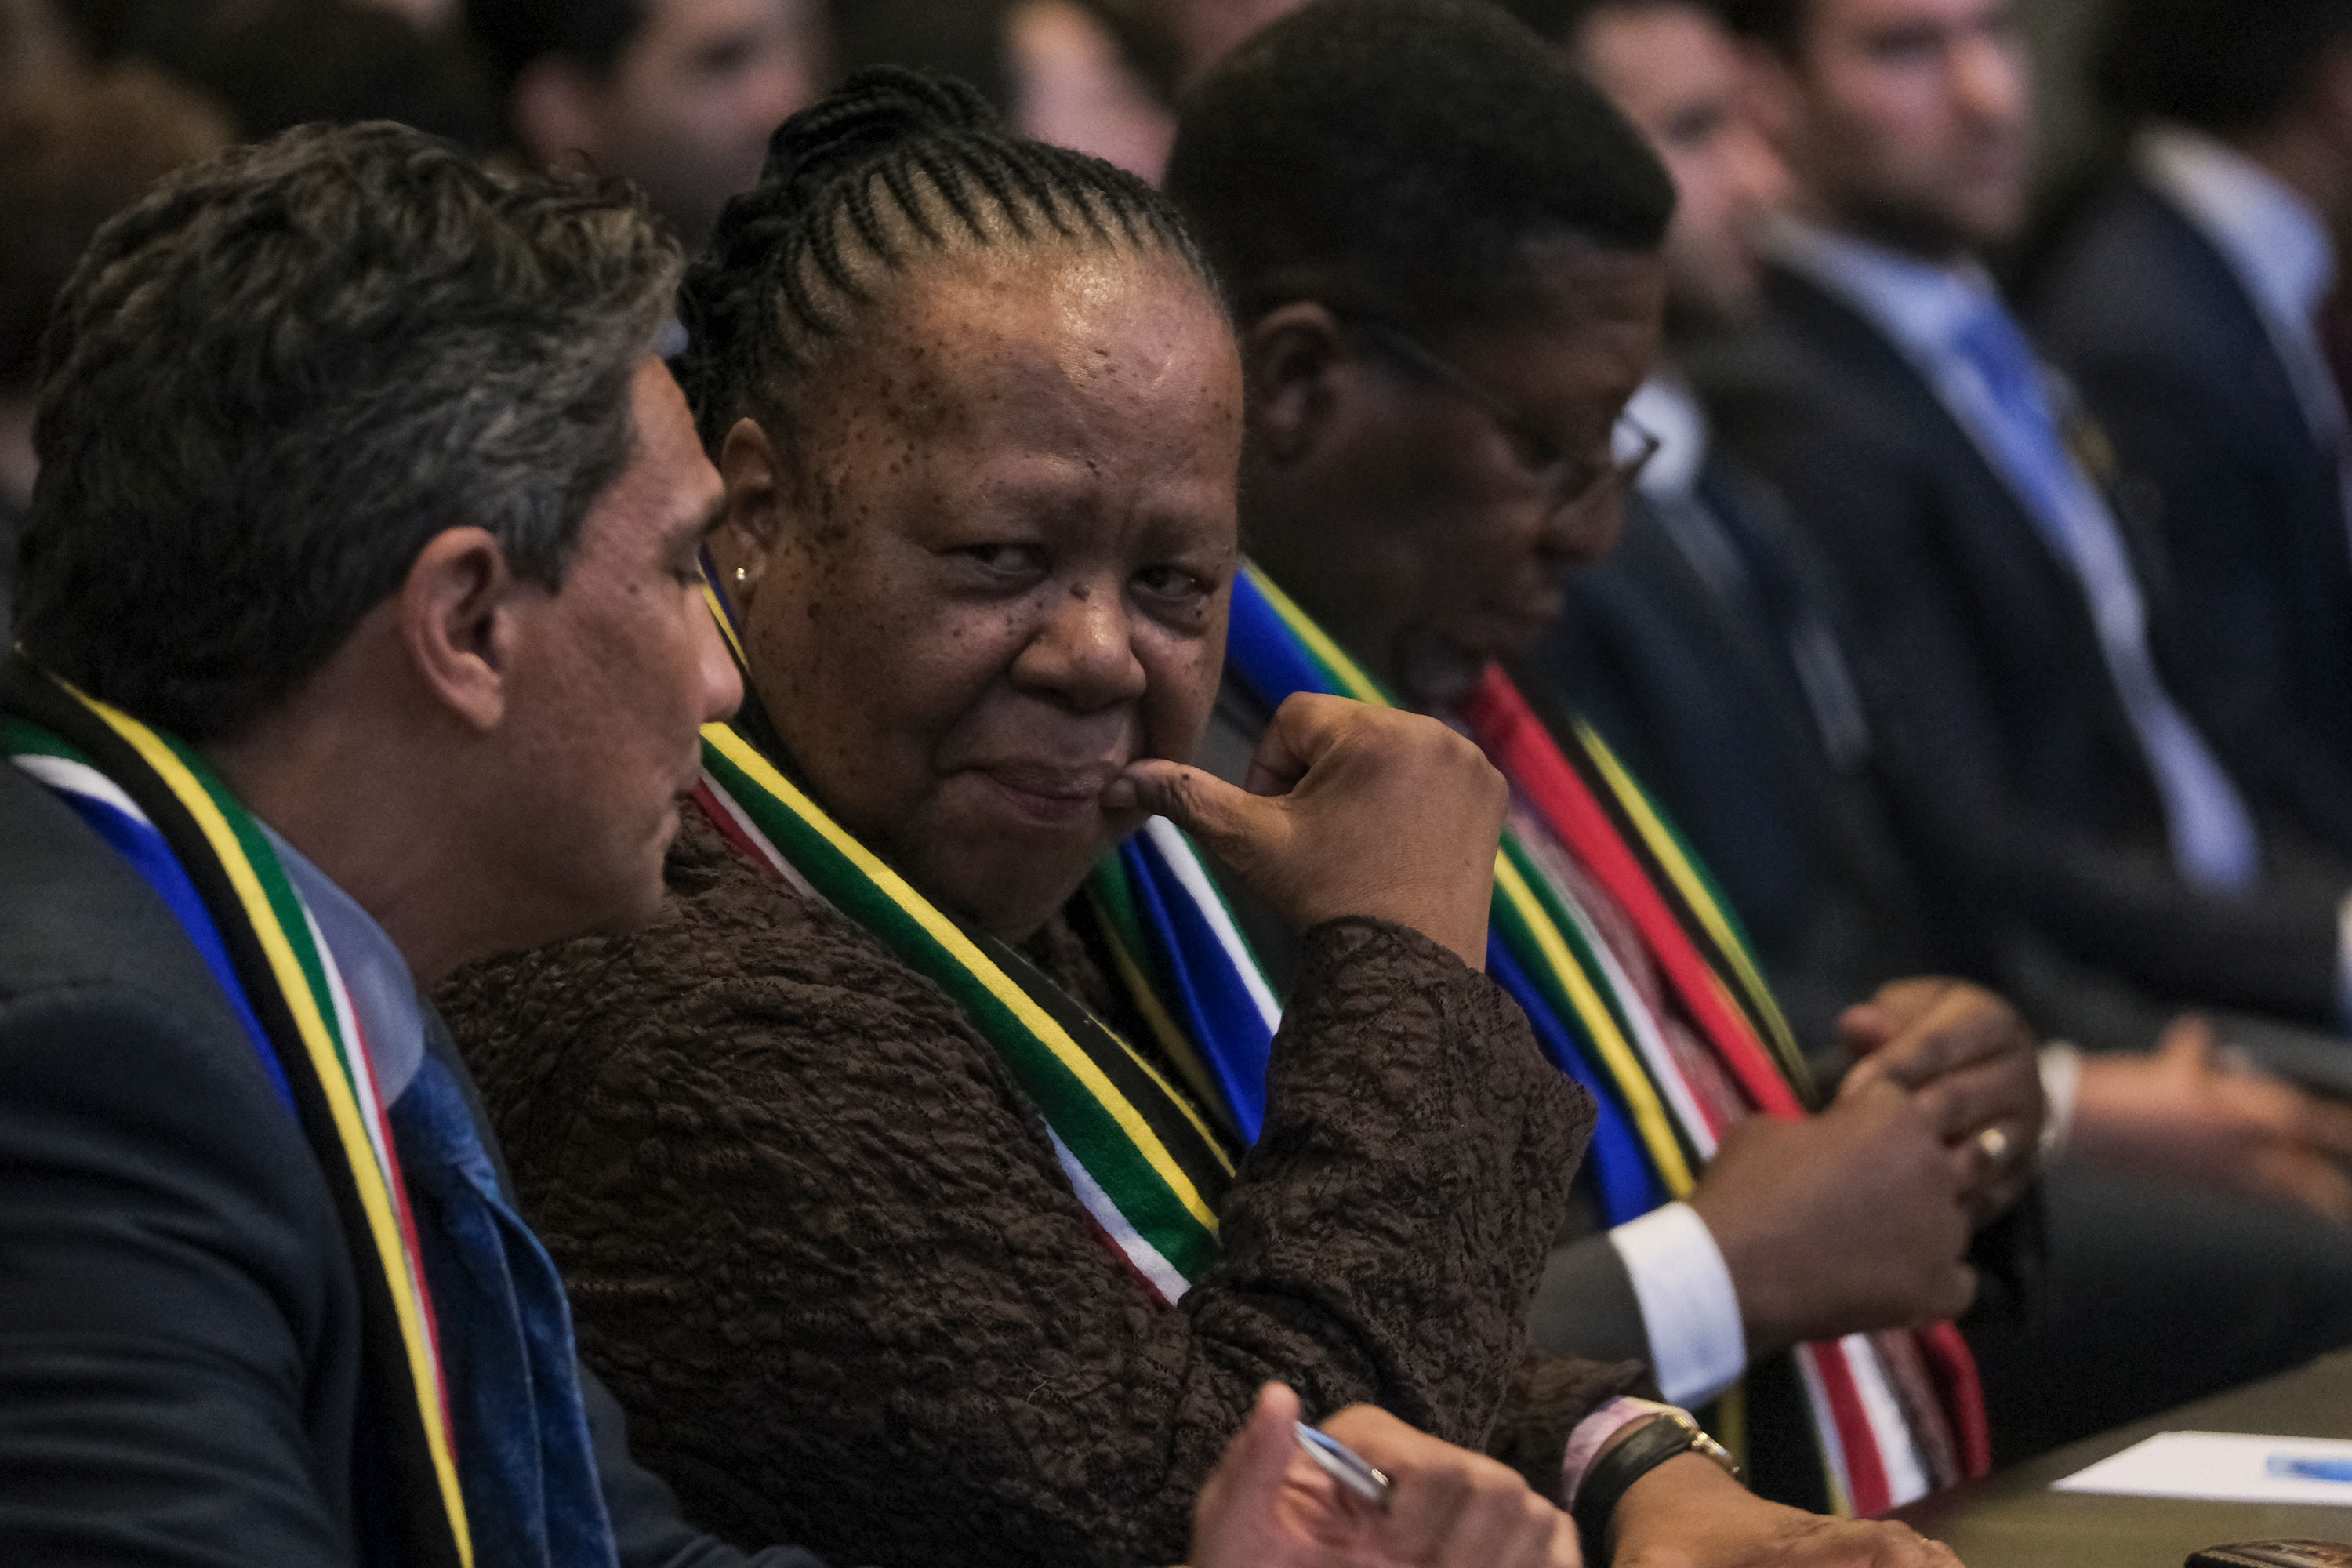 South Africa's Foreign Minister Naledi Pandor, center, attends the session of the International Court of Justice in The Hague, Netherlands, on Friday.